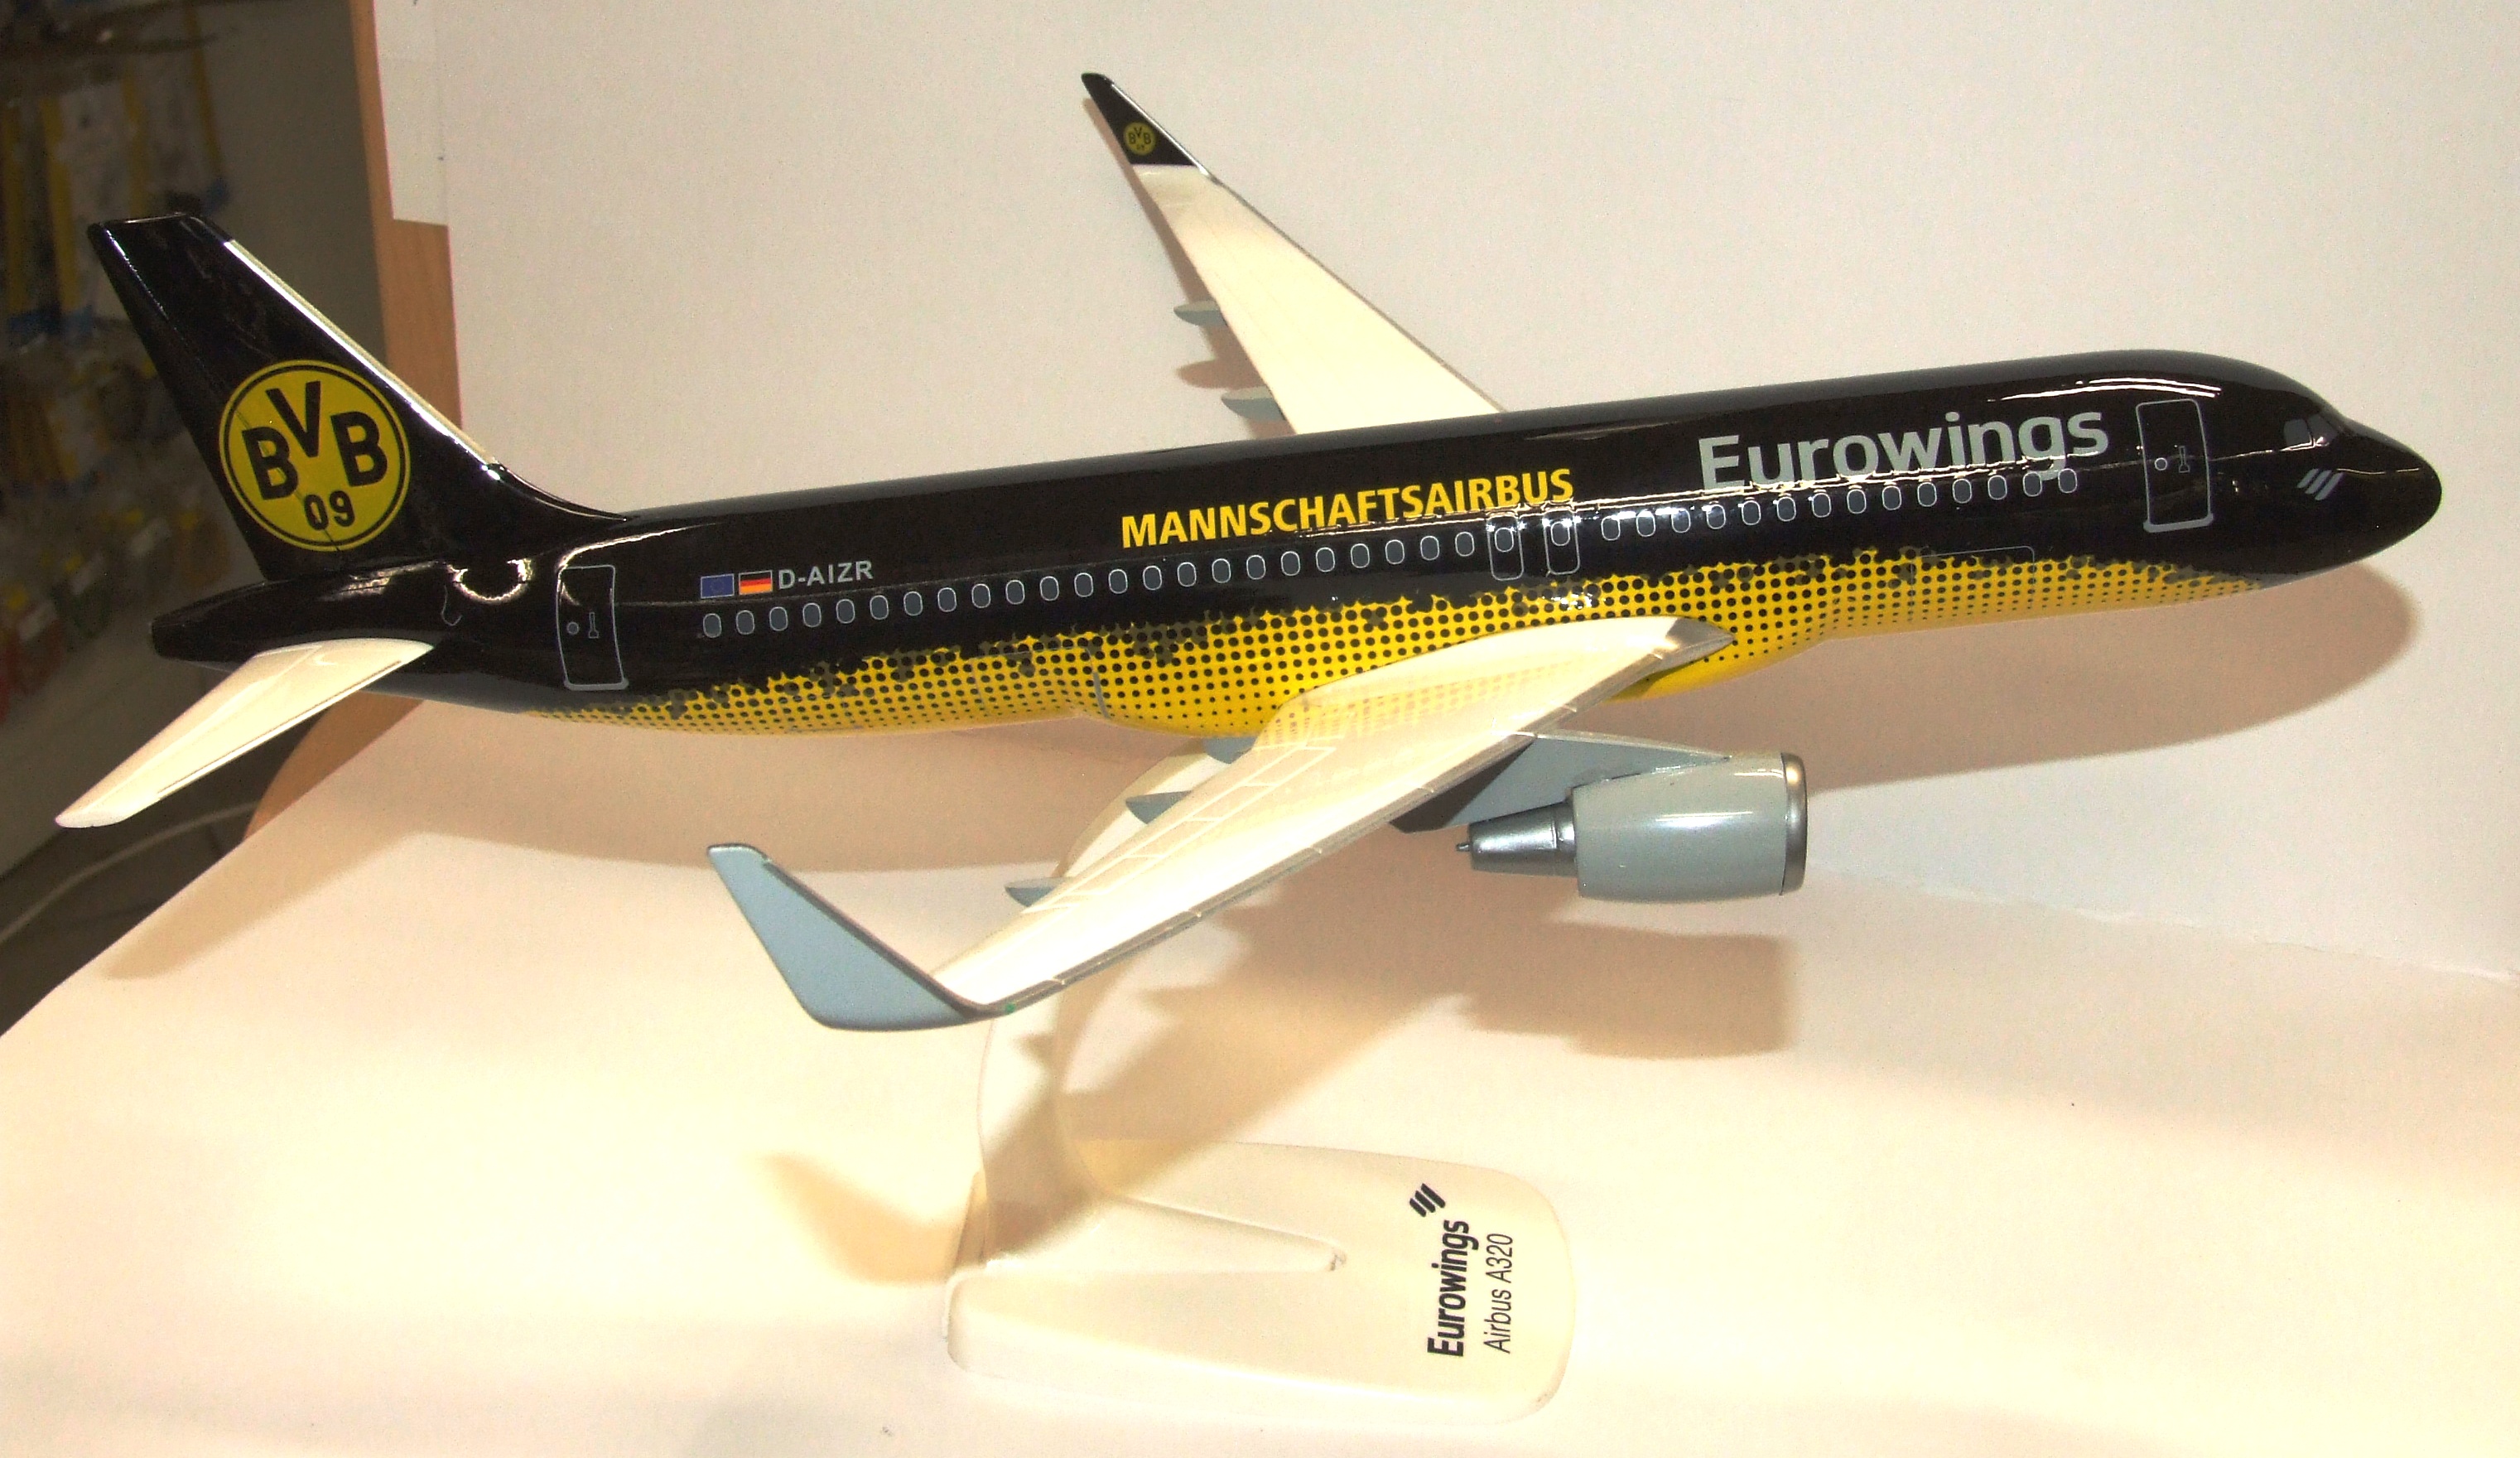 Modellauto Flugzeuge Herpa Airbus A320 Eurowings Bvb Mannschaftsairbues